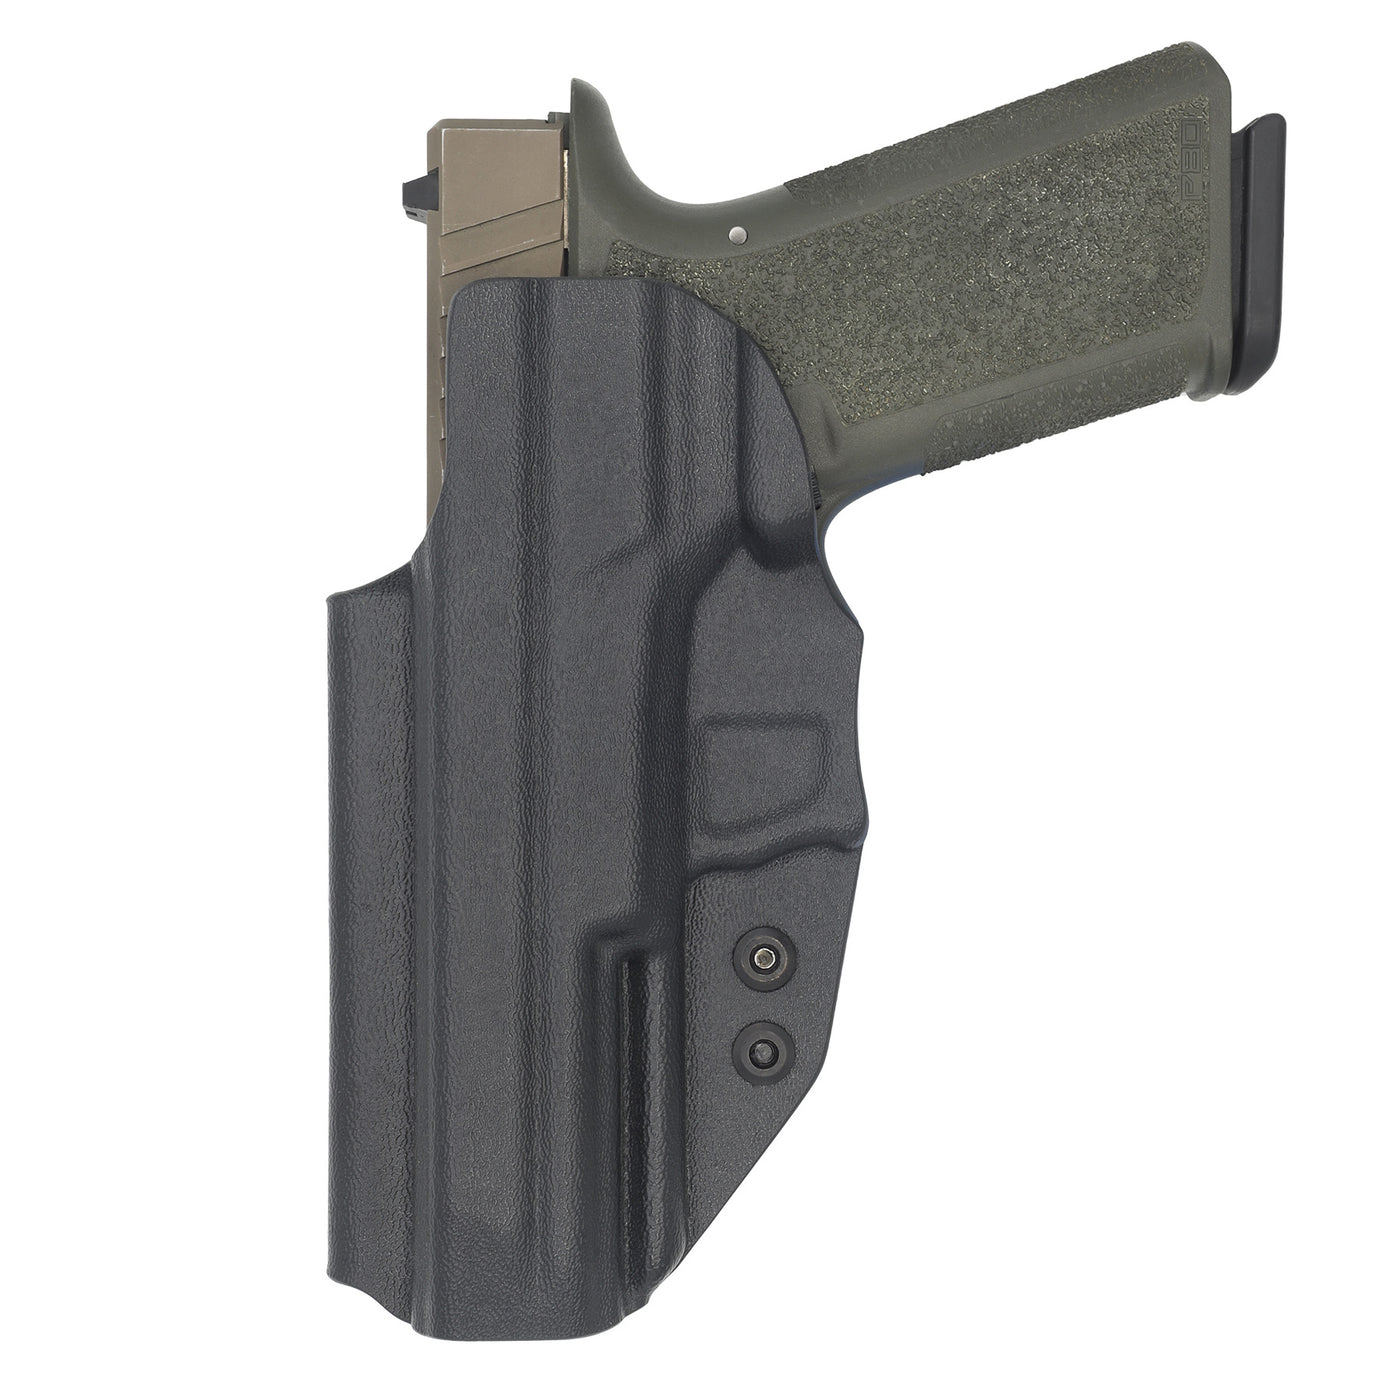 This is rear of the quickship C&G Holsters inside the waistband holster for the Poly80 PF940c.